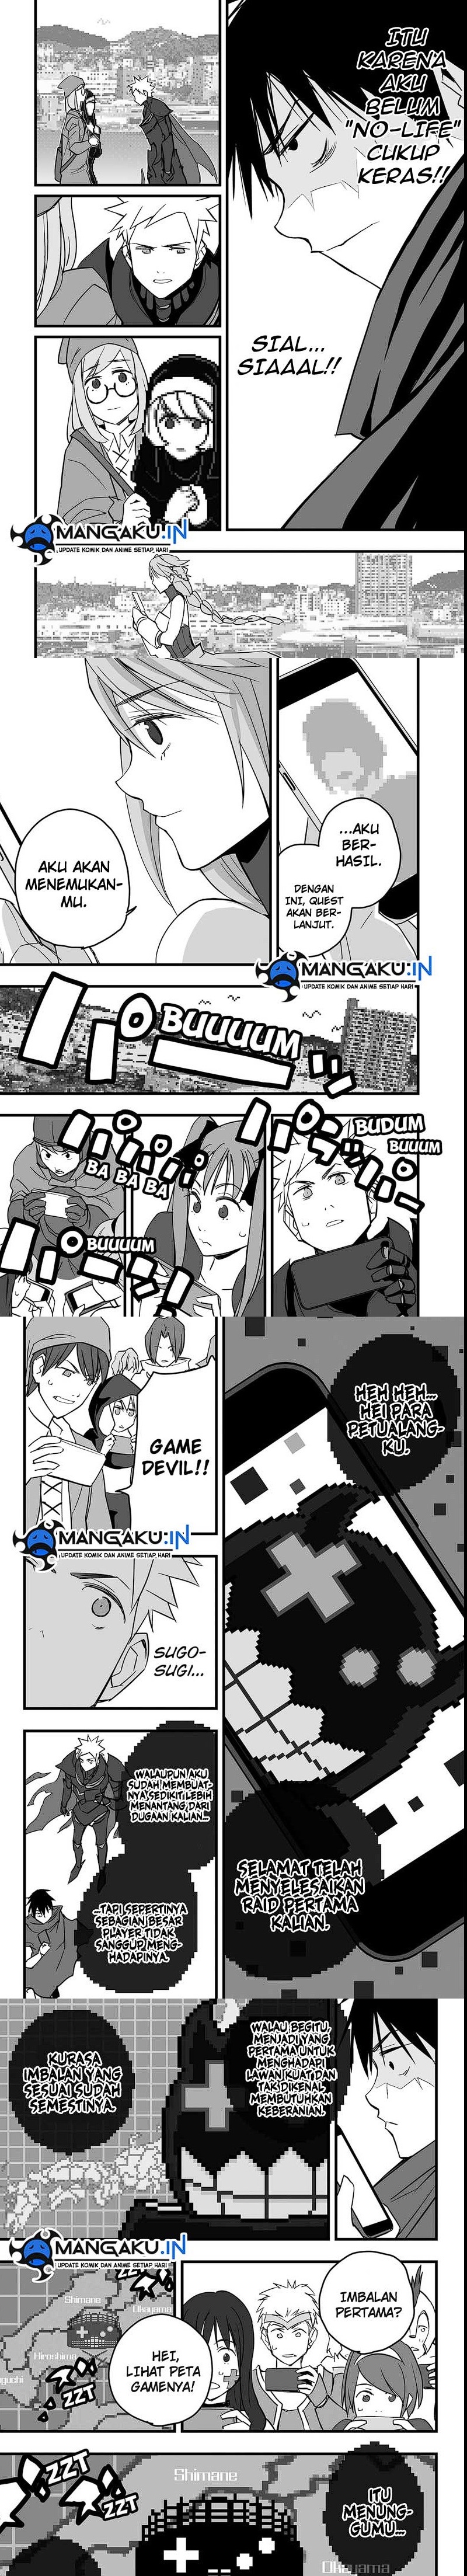 The Game Devil Chapter 12